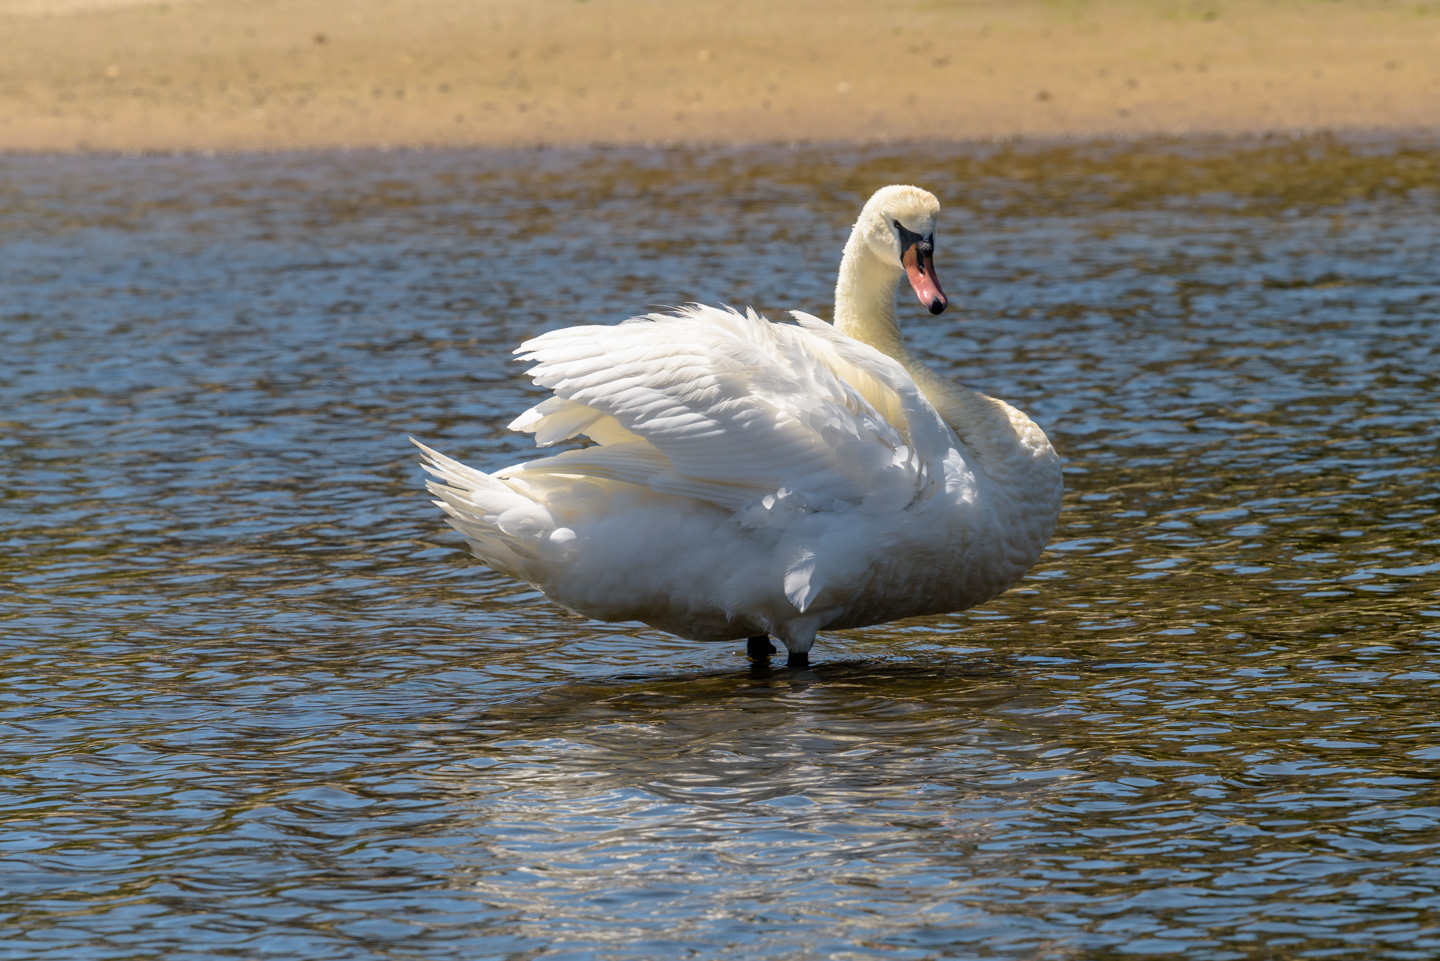 Mute Swan looking towards picture taker